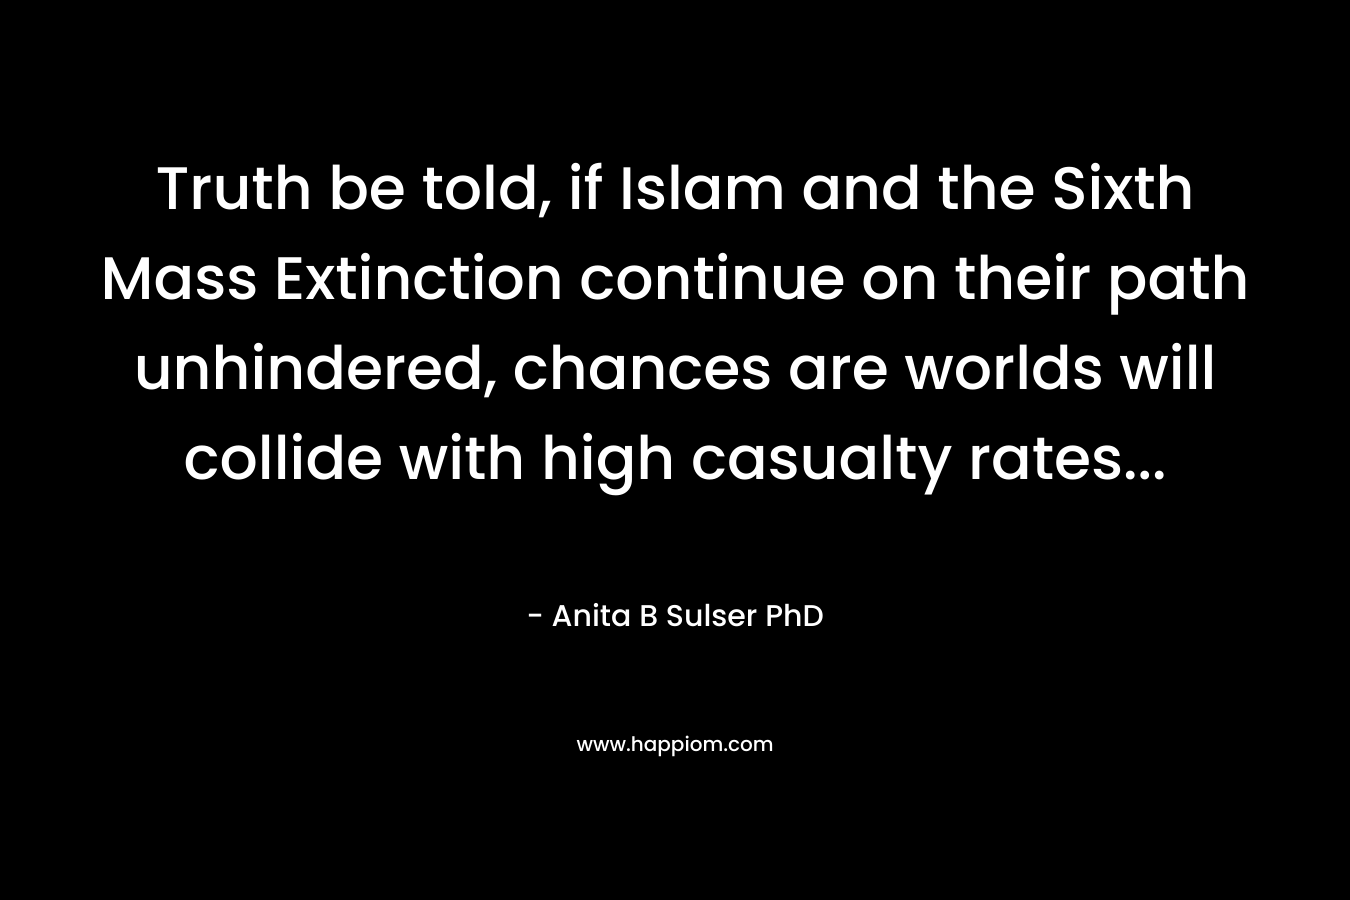 Truth be told, if Islam and the Sixth Mass Extinction continue on their path unhindered, chances are worlds will collide with high casualty rates...